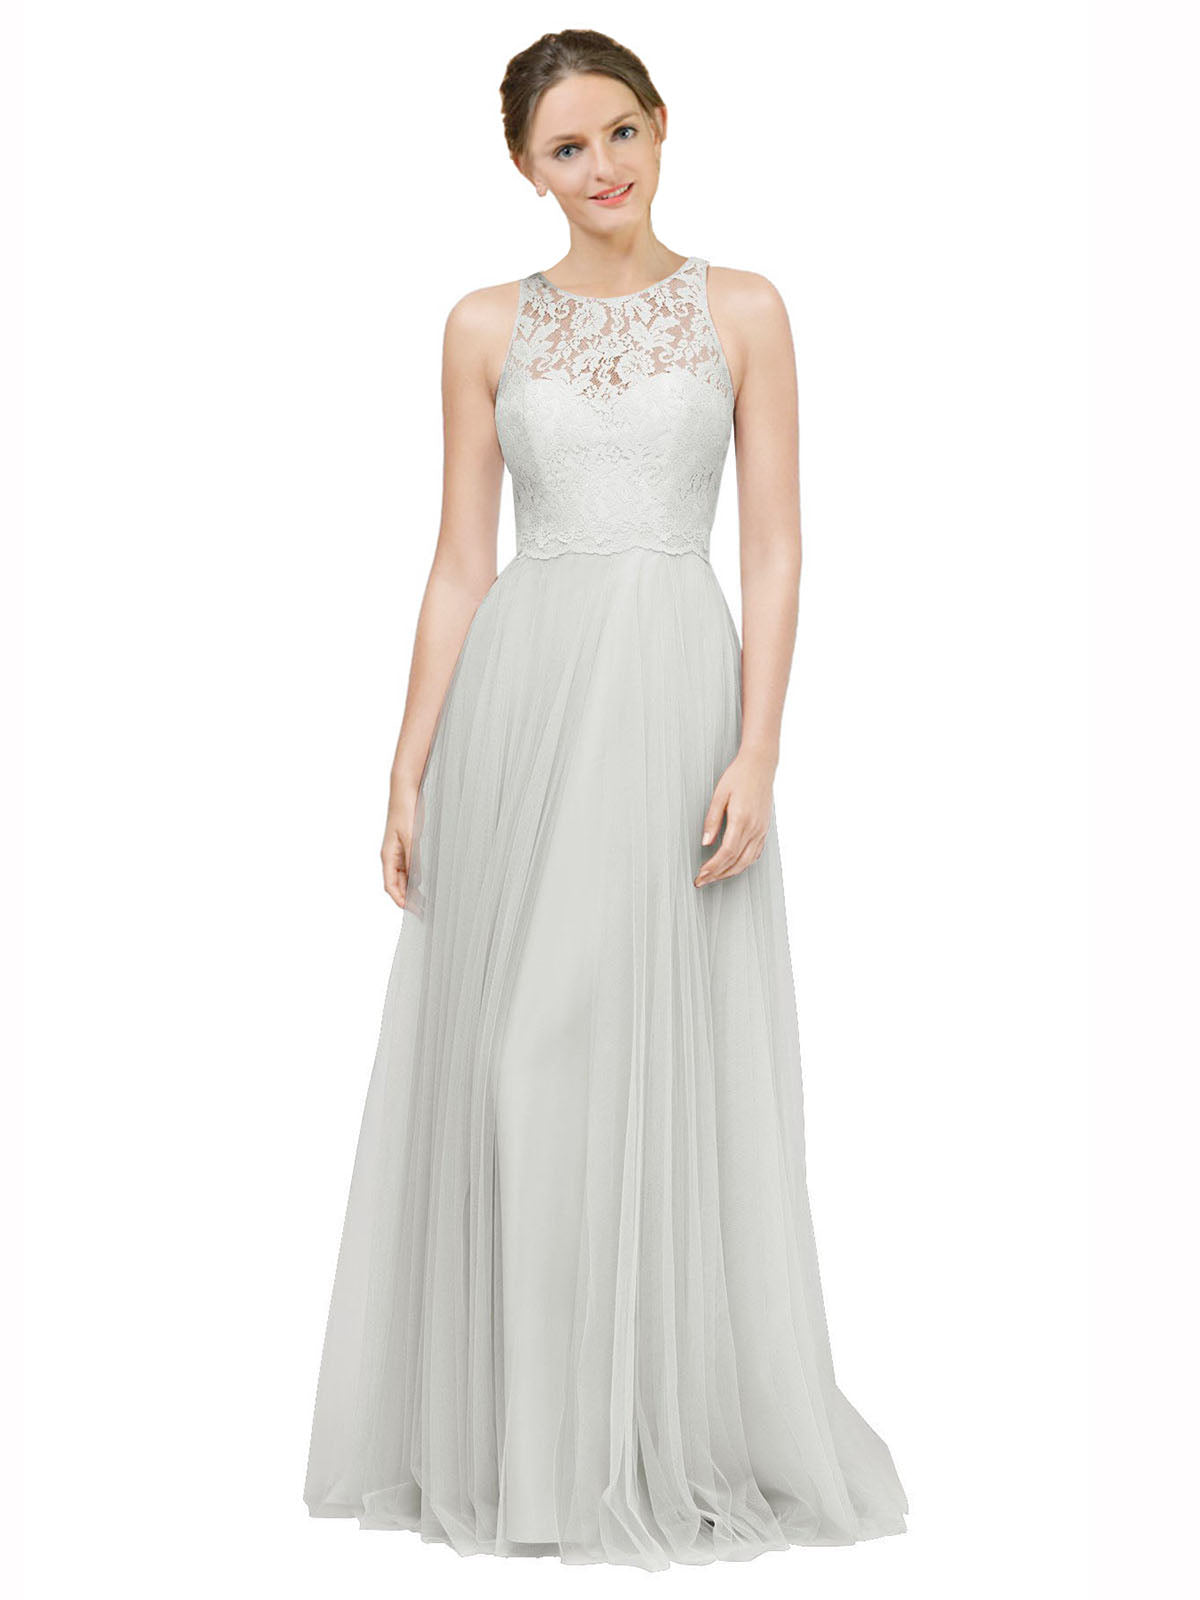 Long A-Line Illusion High Neck Sleeveless Ivory Tulle Lace Bridesmaid Dress Alma